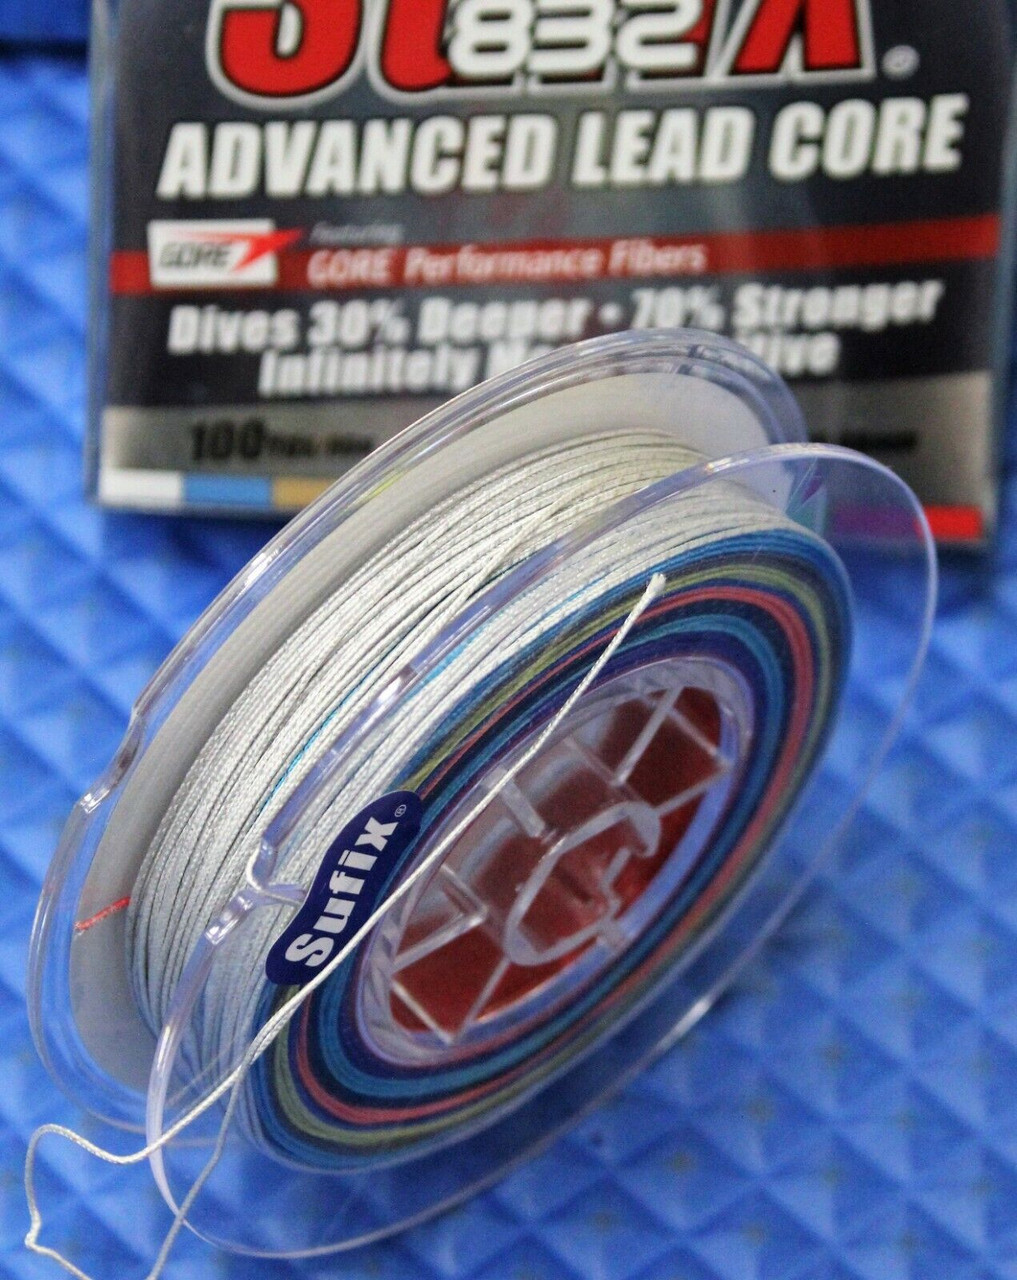 Sufix 832 Advanced Lead Core 100YDS Metered 658-MC CHOOSE YOUR LINE WEIGHT!